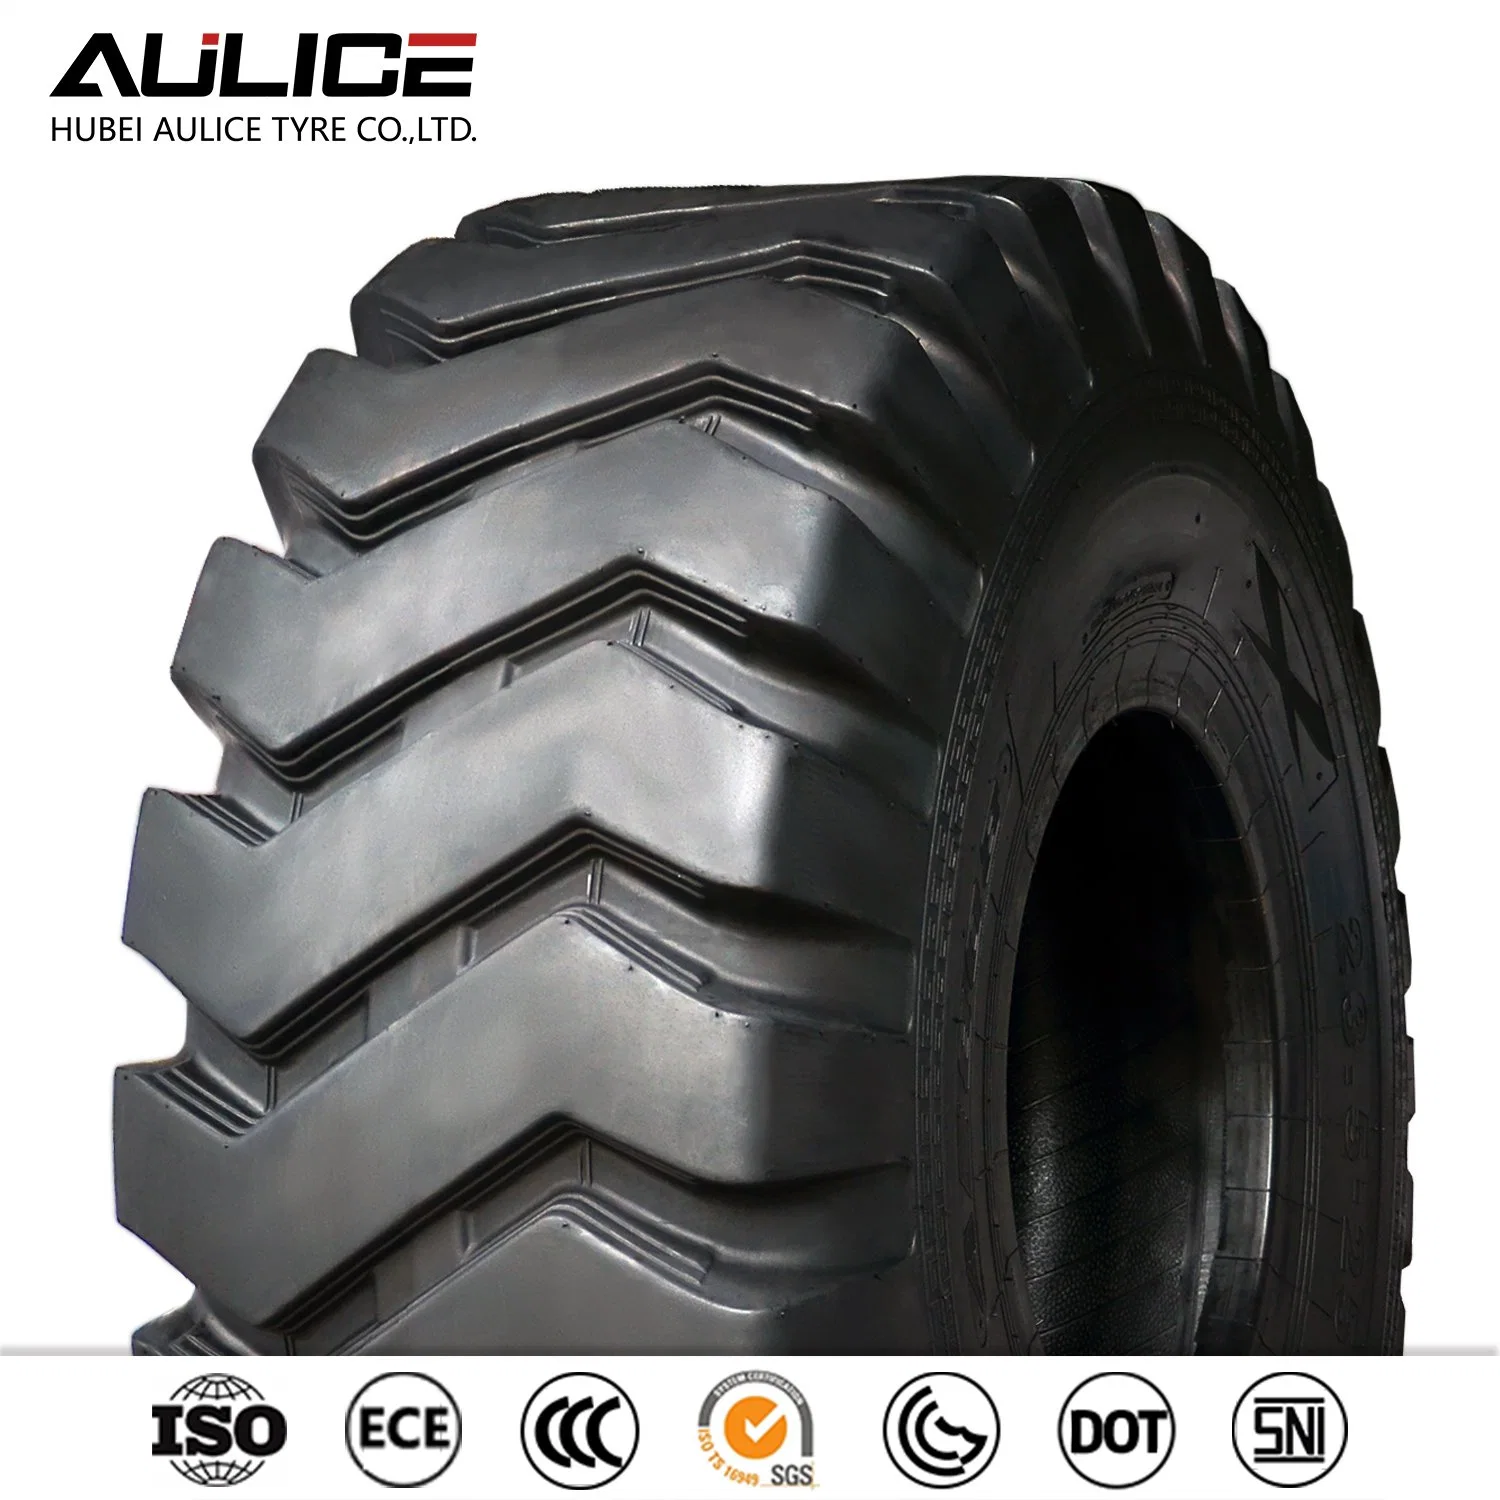 Loader Excavator Tire E3 /L3 Radial/ Bias OTR Tire 26.5-25 23.5-25, 20.5-25, 17.5-25, 16/70-20 from HUBEI AULICE